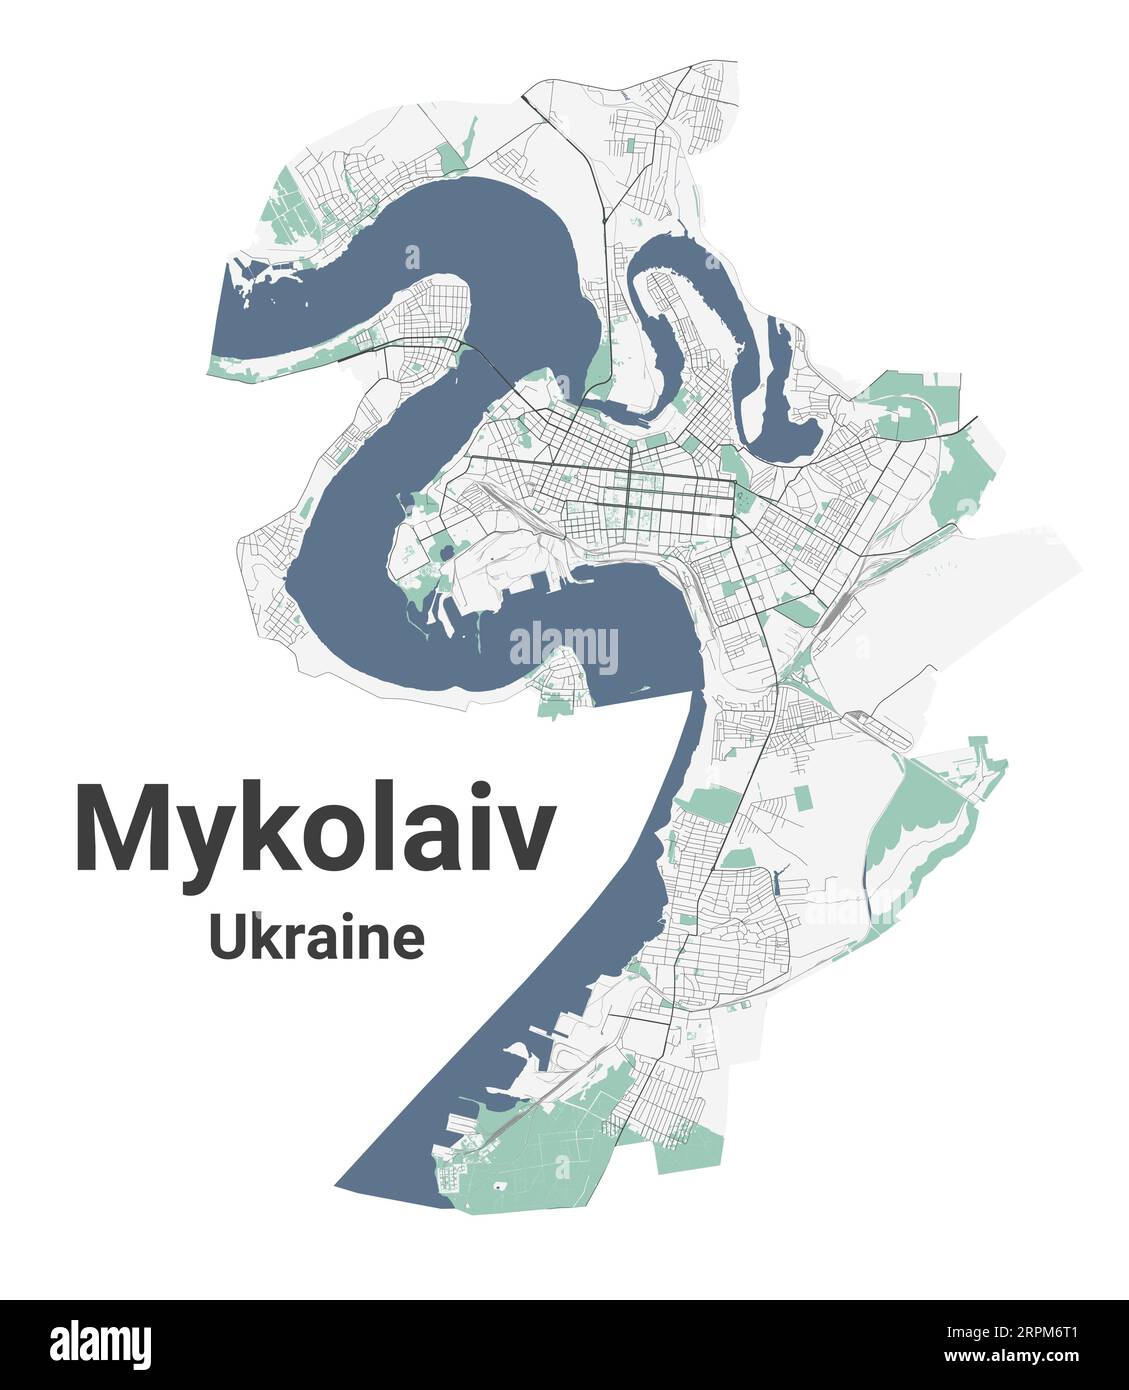 Mykolaiv map, Ukrainian city. Municipal administrative area map with rivers and roads, parks and railways. Vector illustration. Stock Vector